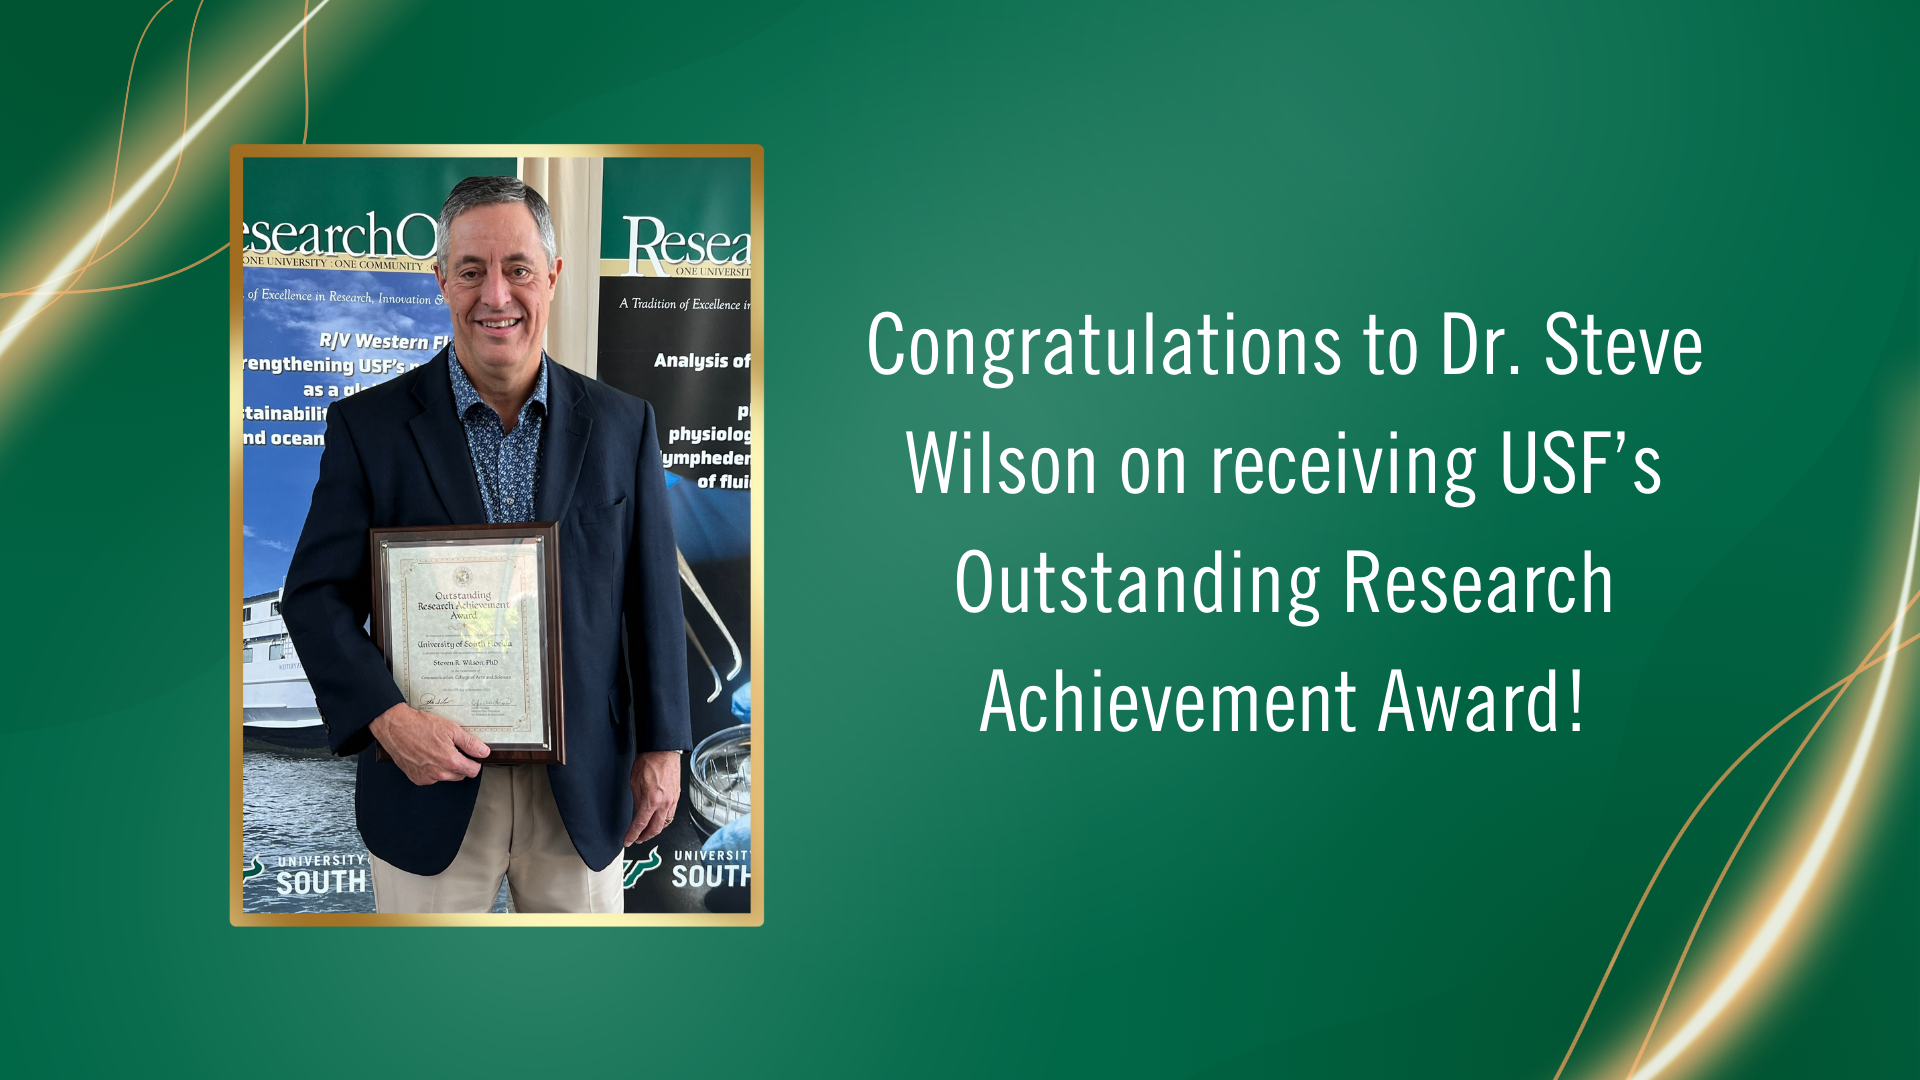 Dr. Steve Wilson is awarded USF's Outstanding Research Achievement Award